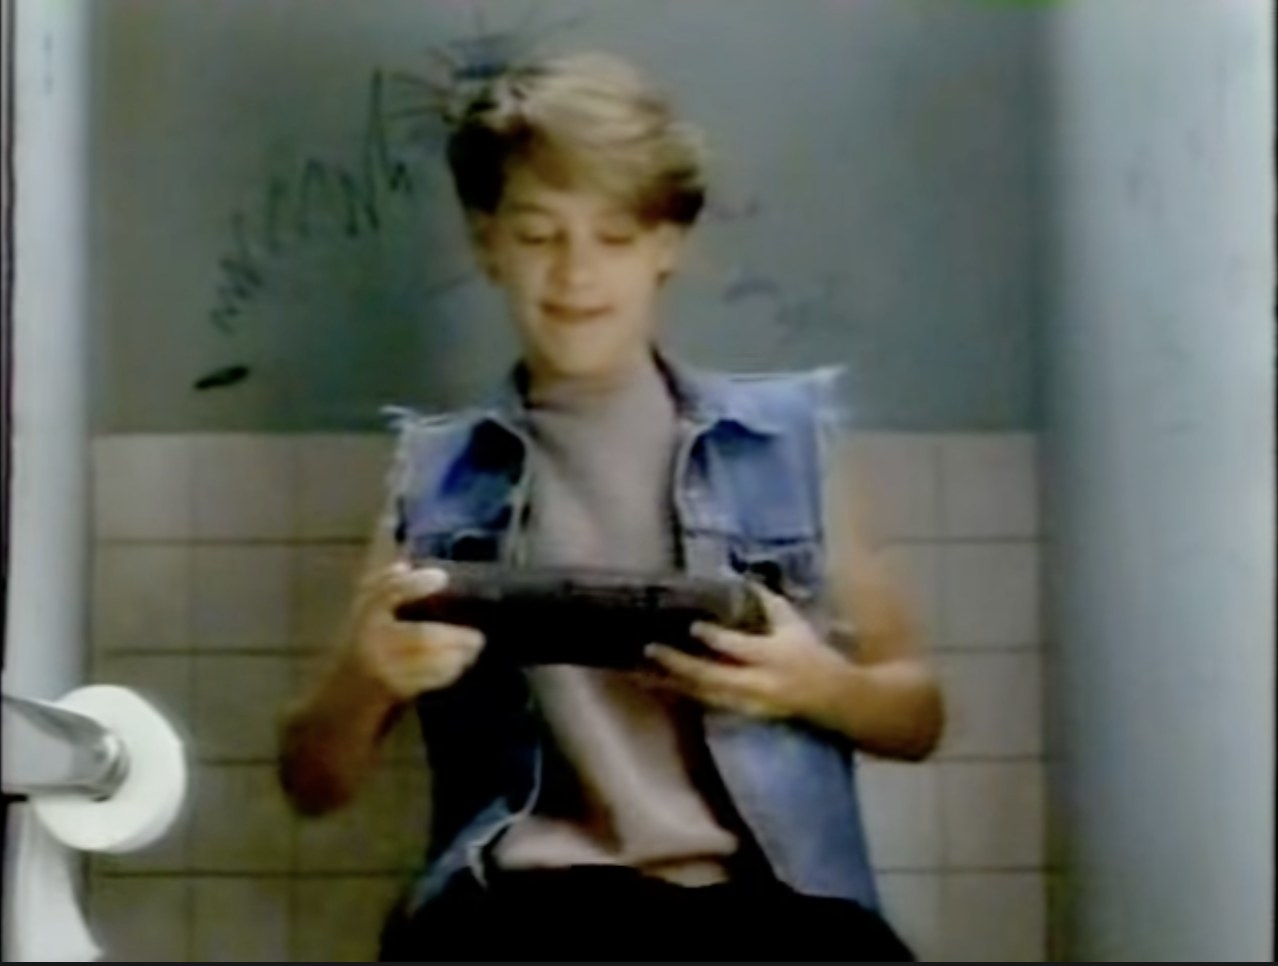 Tobey Maguire playing a video game in a restroom in an Atari Lynx commercial